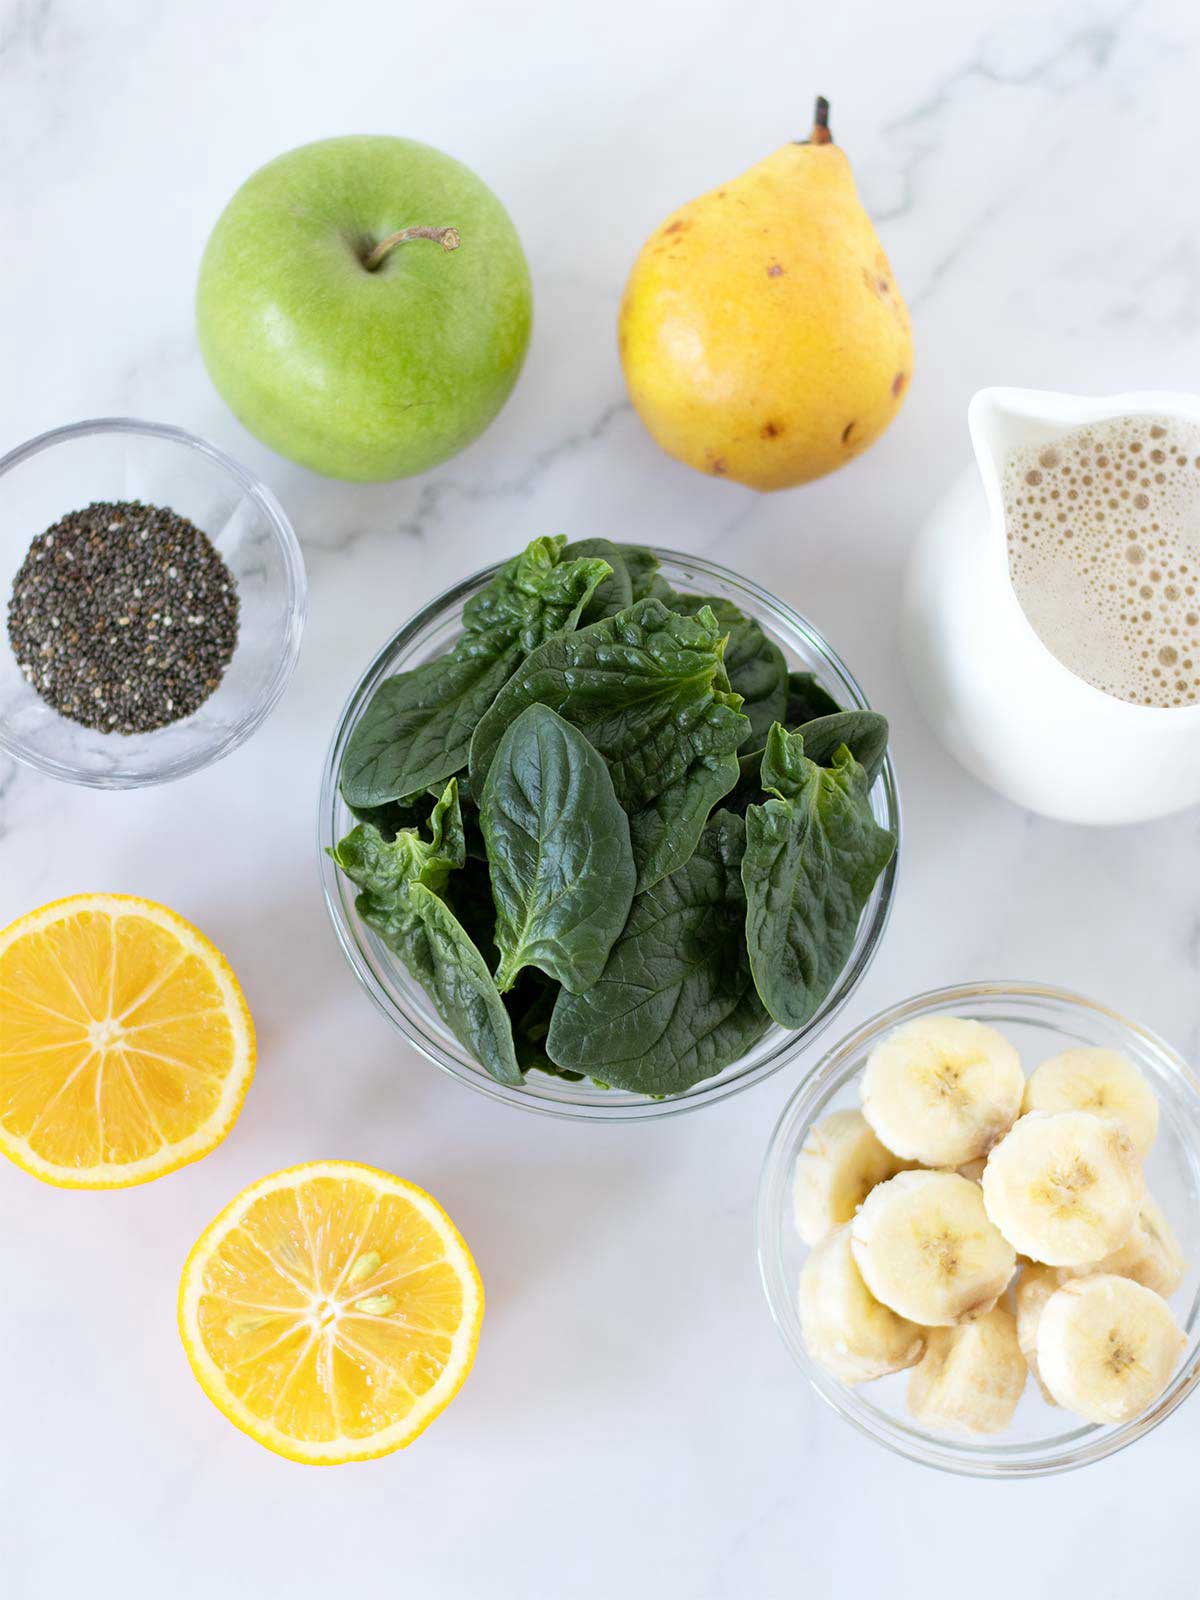 Plant-based ingredients for making homemade weight loss morning drink: spinach leaves, oat milk, green apple, pear, frozen banana, chia seeds and lemon.